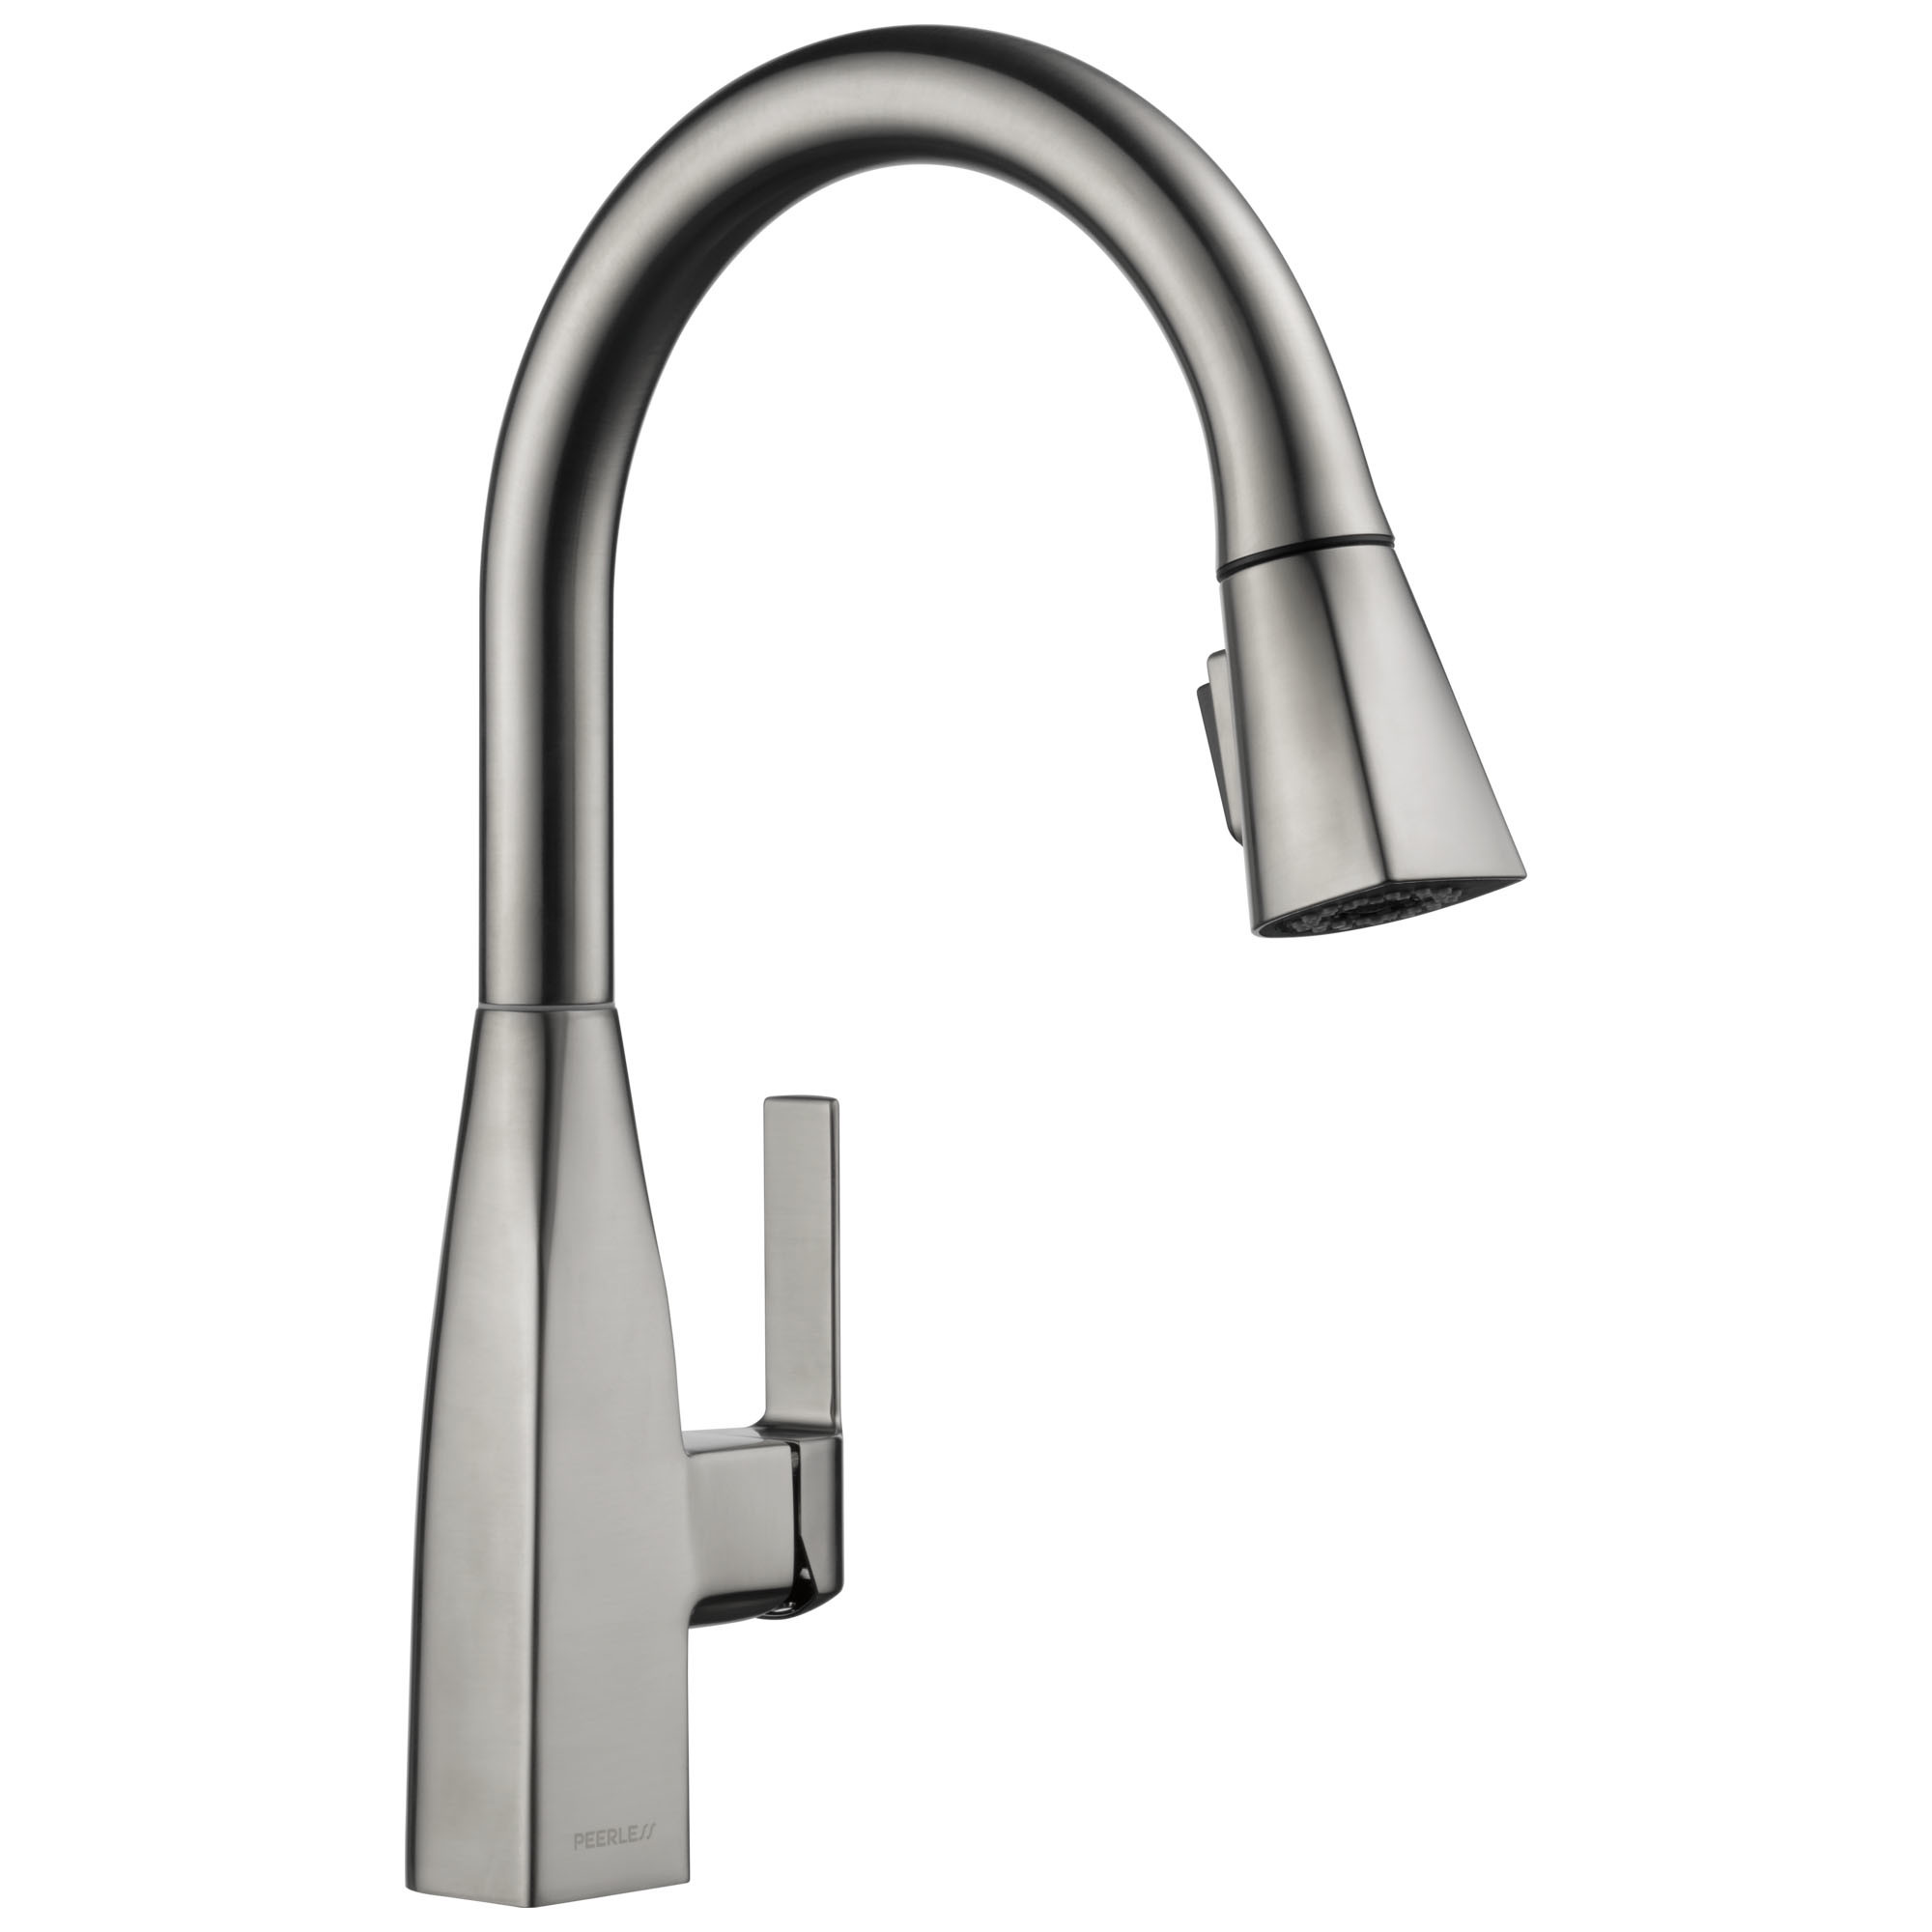 Peerless P7919LF1.0 Xander 1 GPM 1 Hole Pull Down Kitchen Faucet